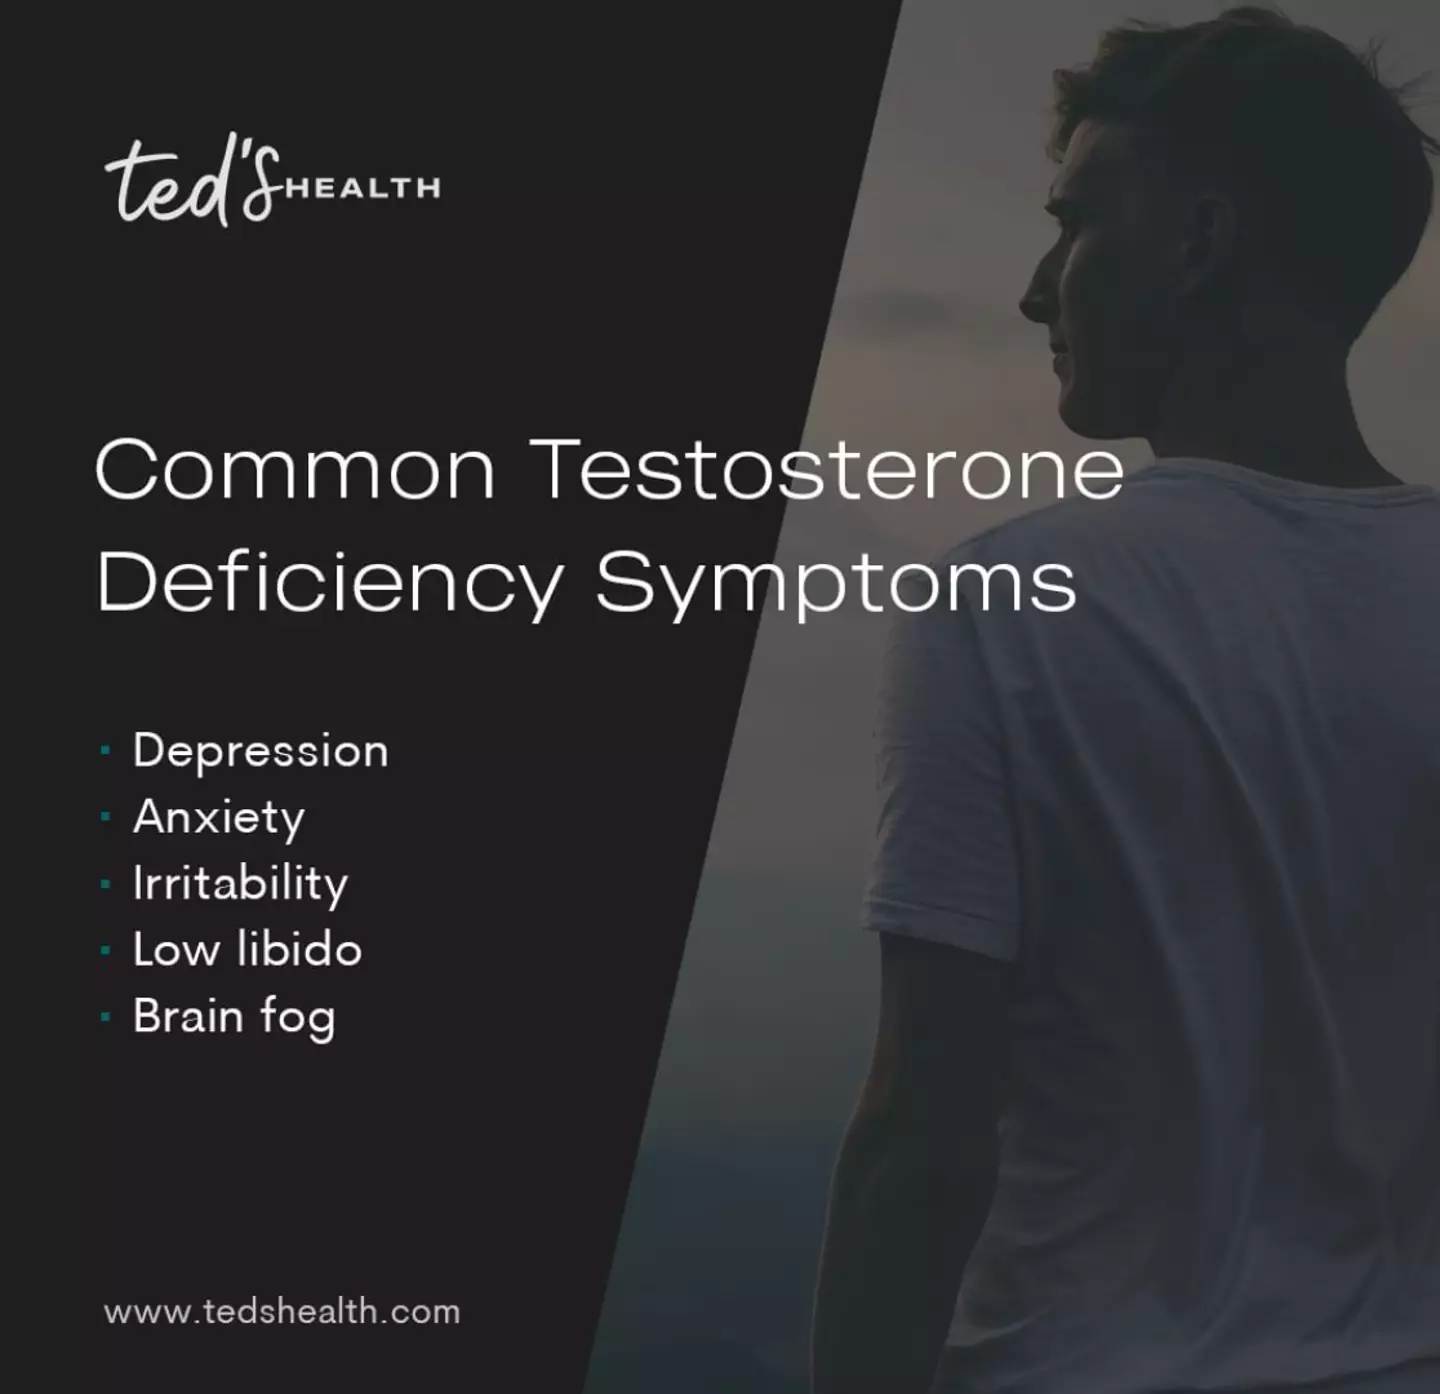 Despite its massive impact on some lives, testosterone deficiency still isn't openly spoken about by many.